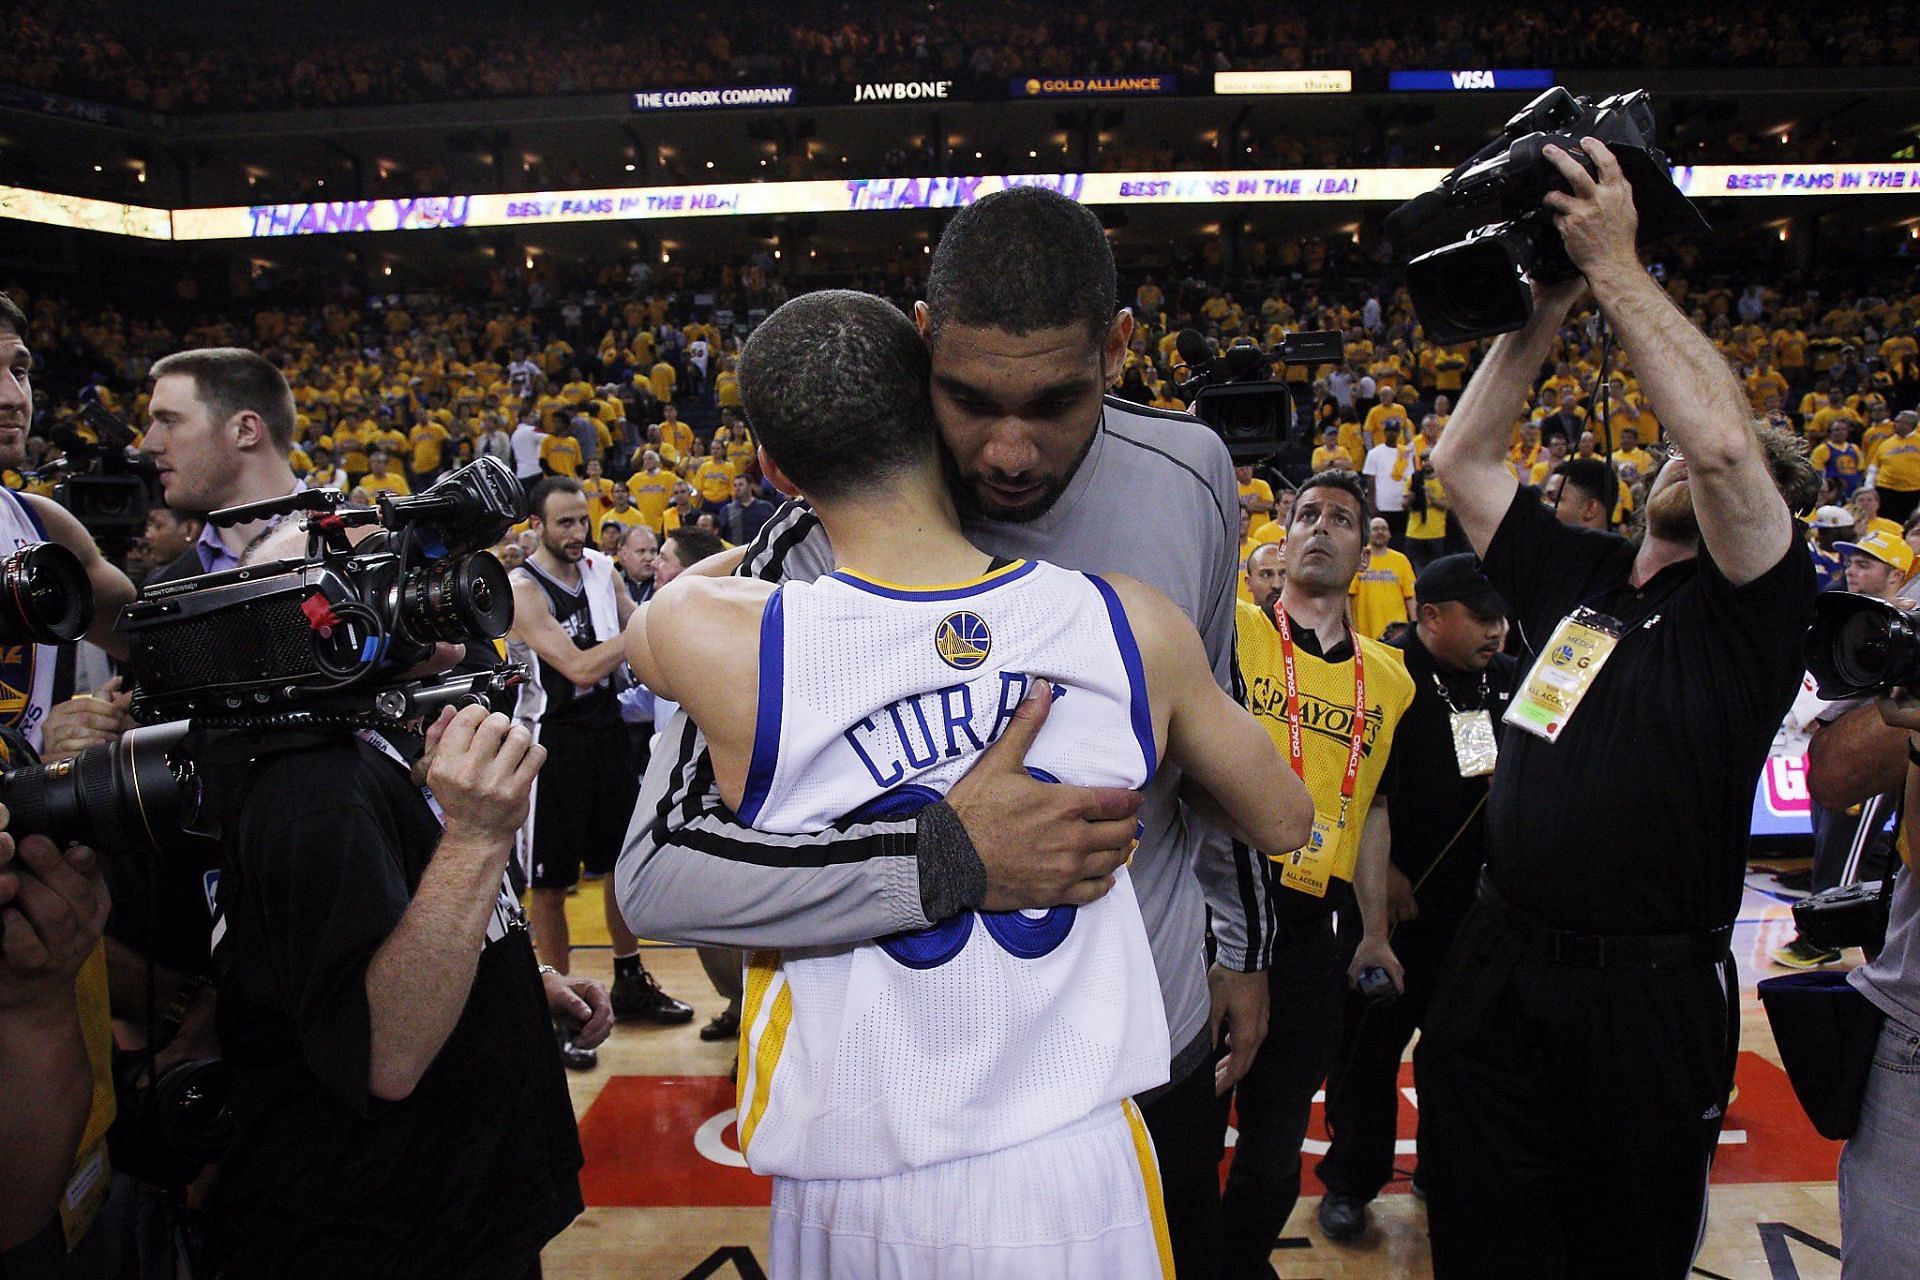 Steve Kerr compared Steph Curry to Hall of Famer Tim Duncan. [Photo: SFGATE]